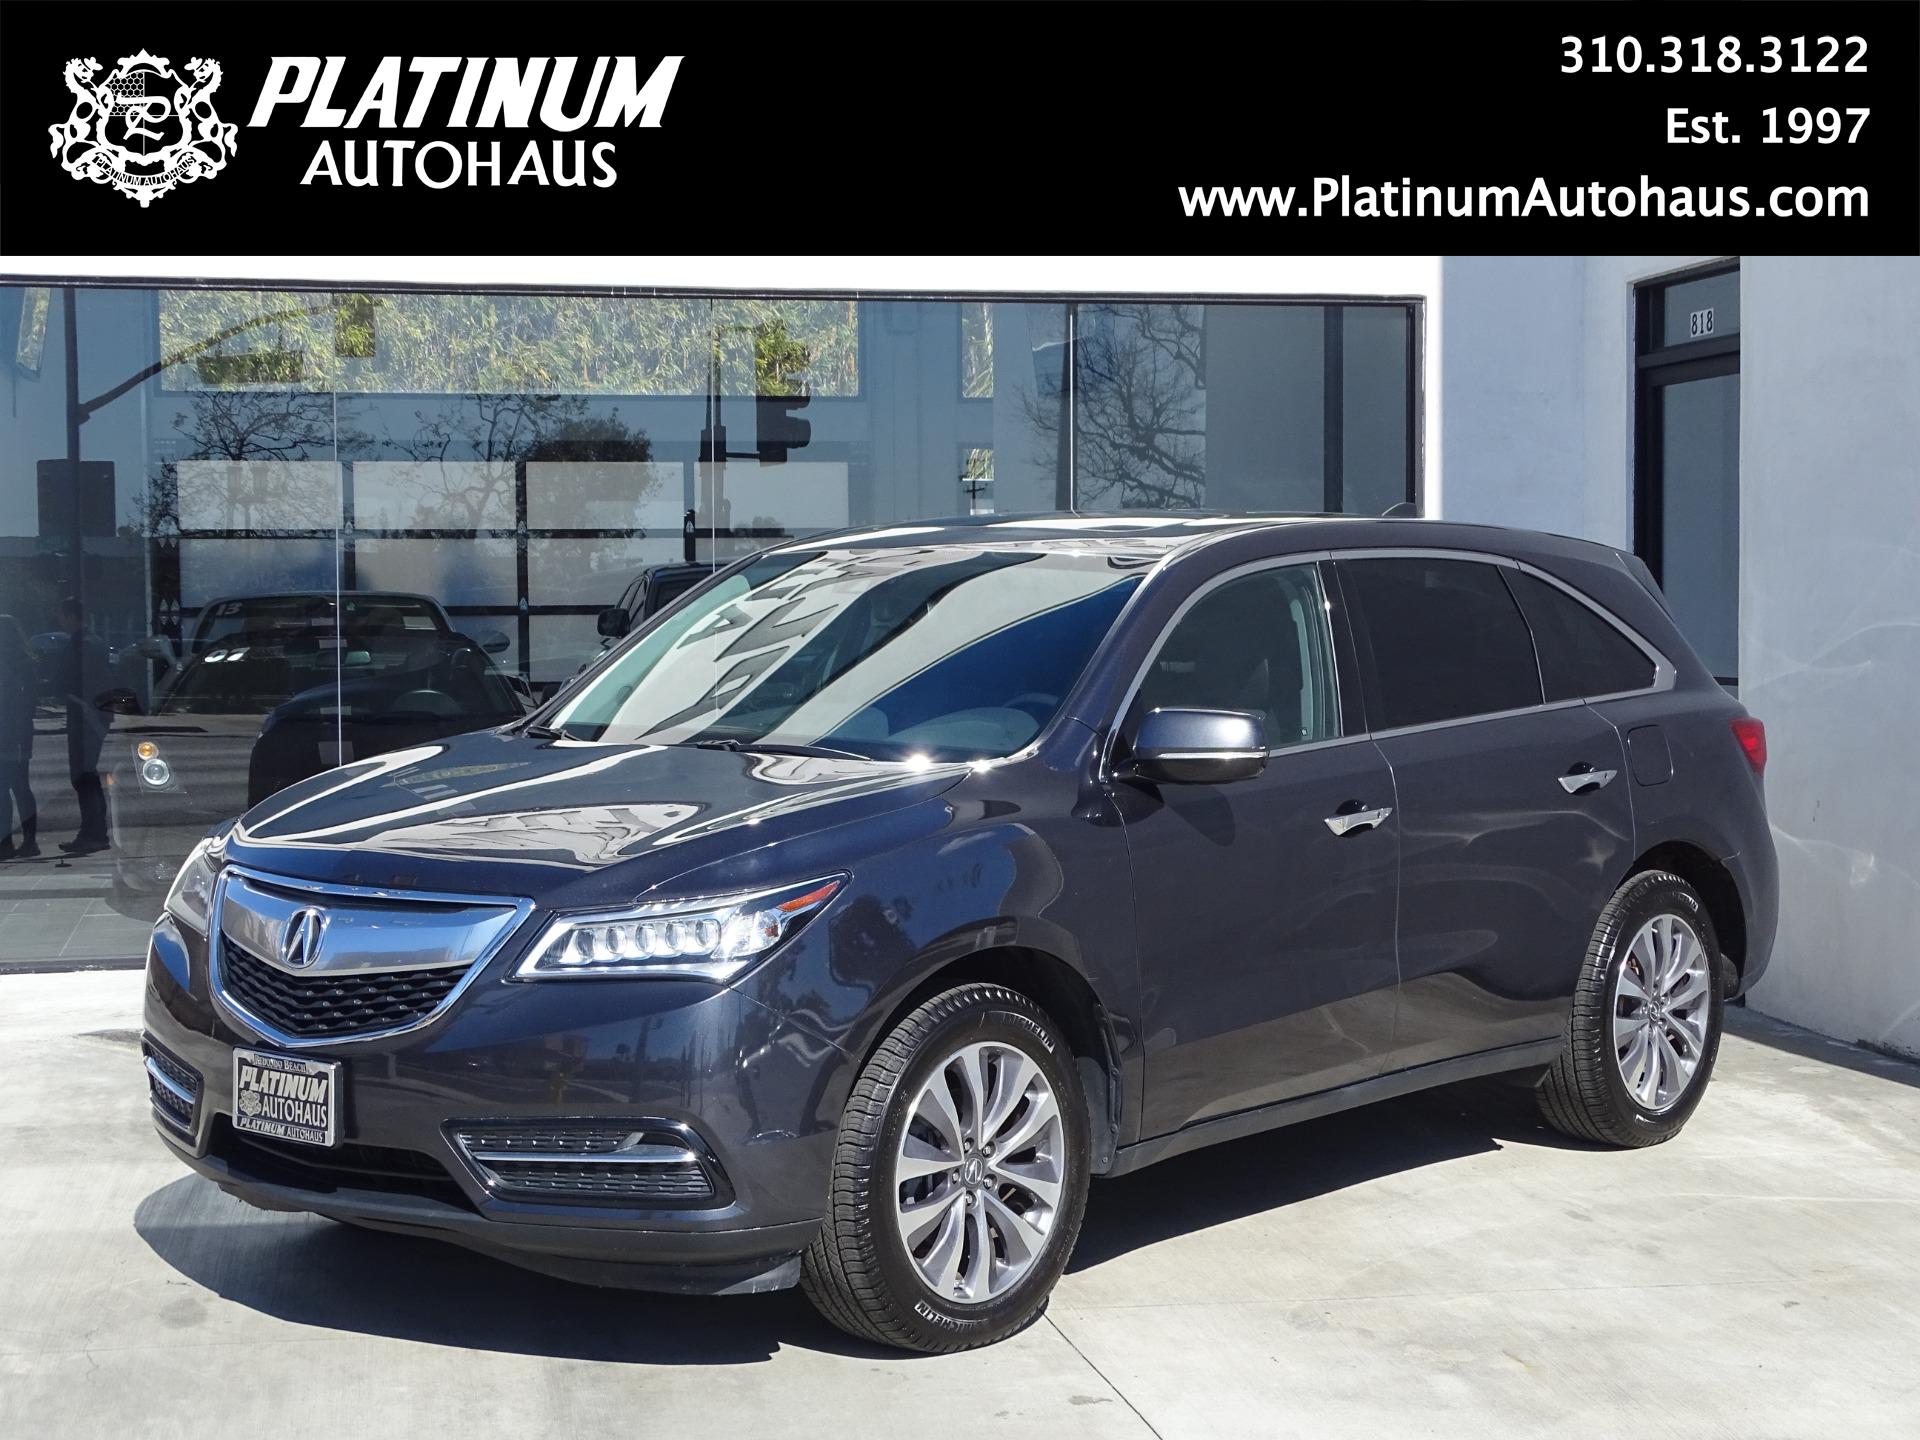 Used 2016 Acura MDX 9-Spd AT w/ Tech & AcuraWatch Plus for Sale in Mobile  AL 36609 Cottage Hill Motors